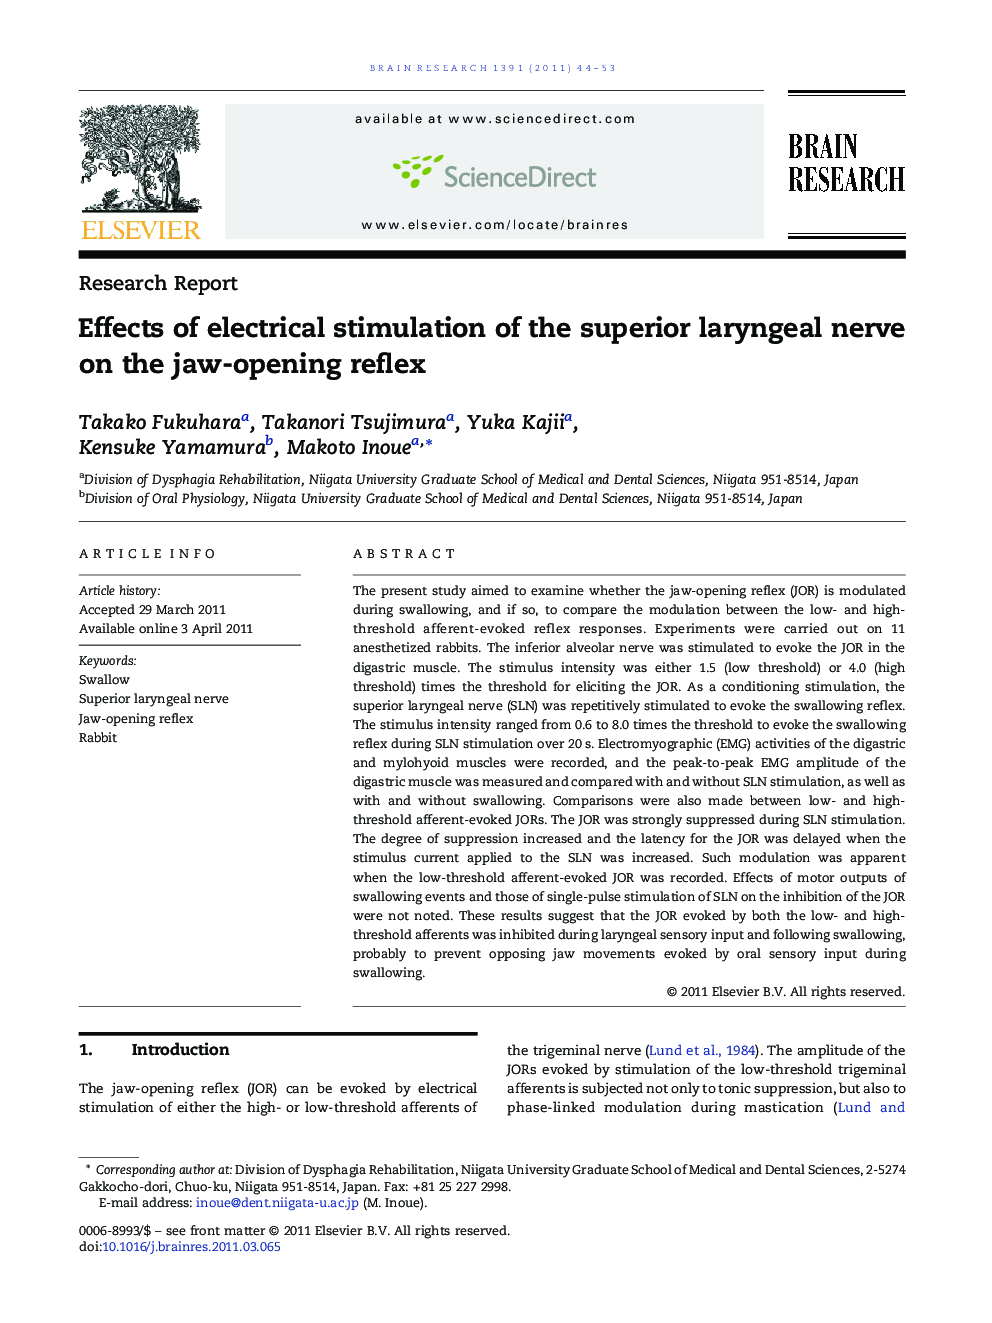 Effects of electrical stimulation of the superior laryngeal nerve on the jaw-opening reflex